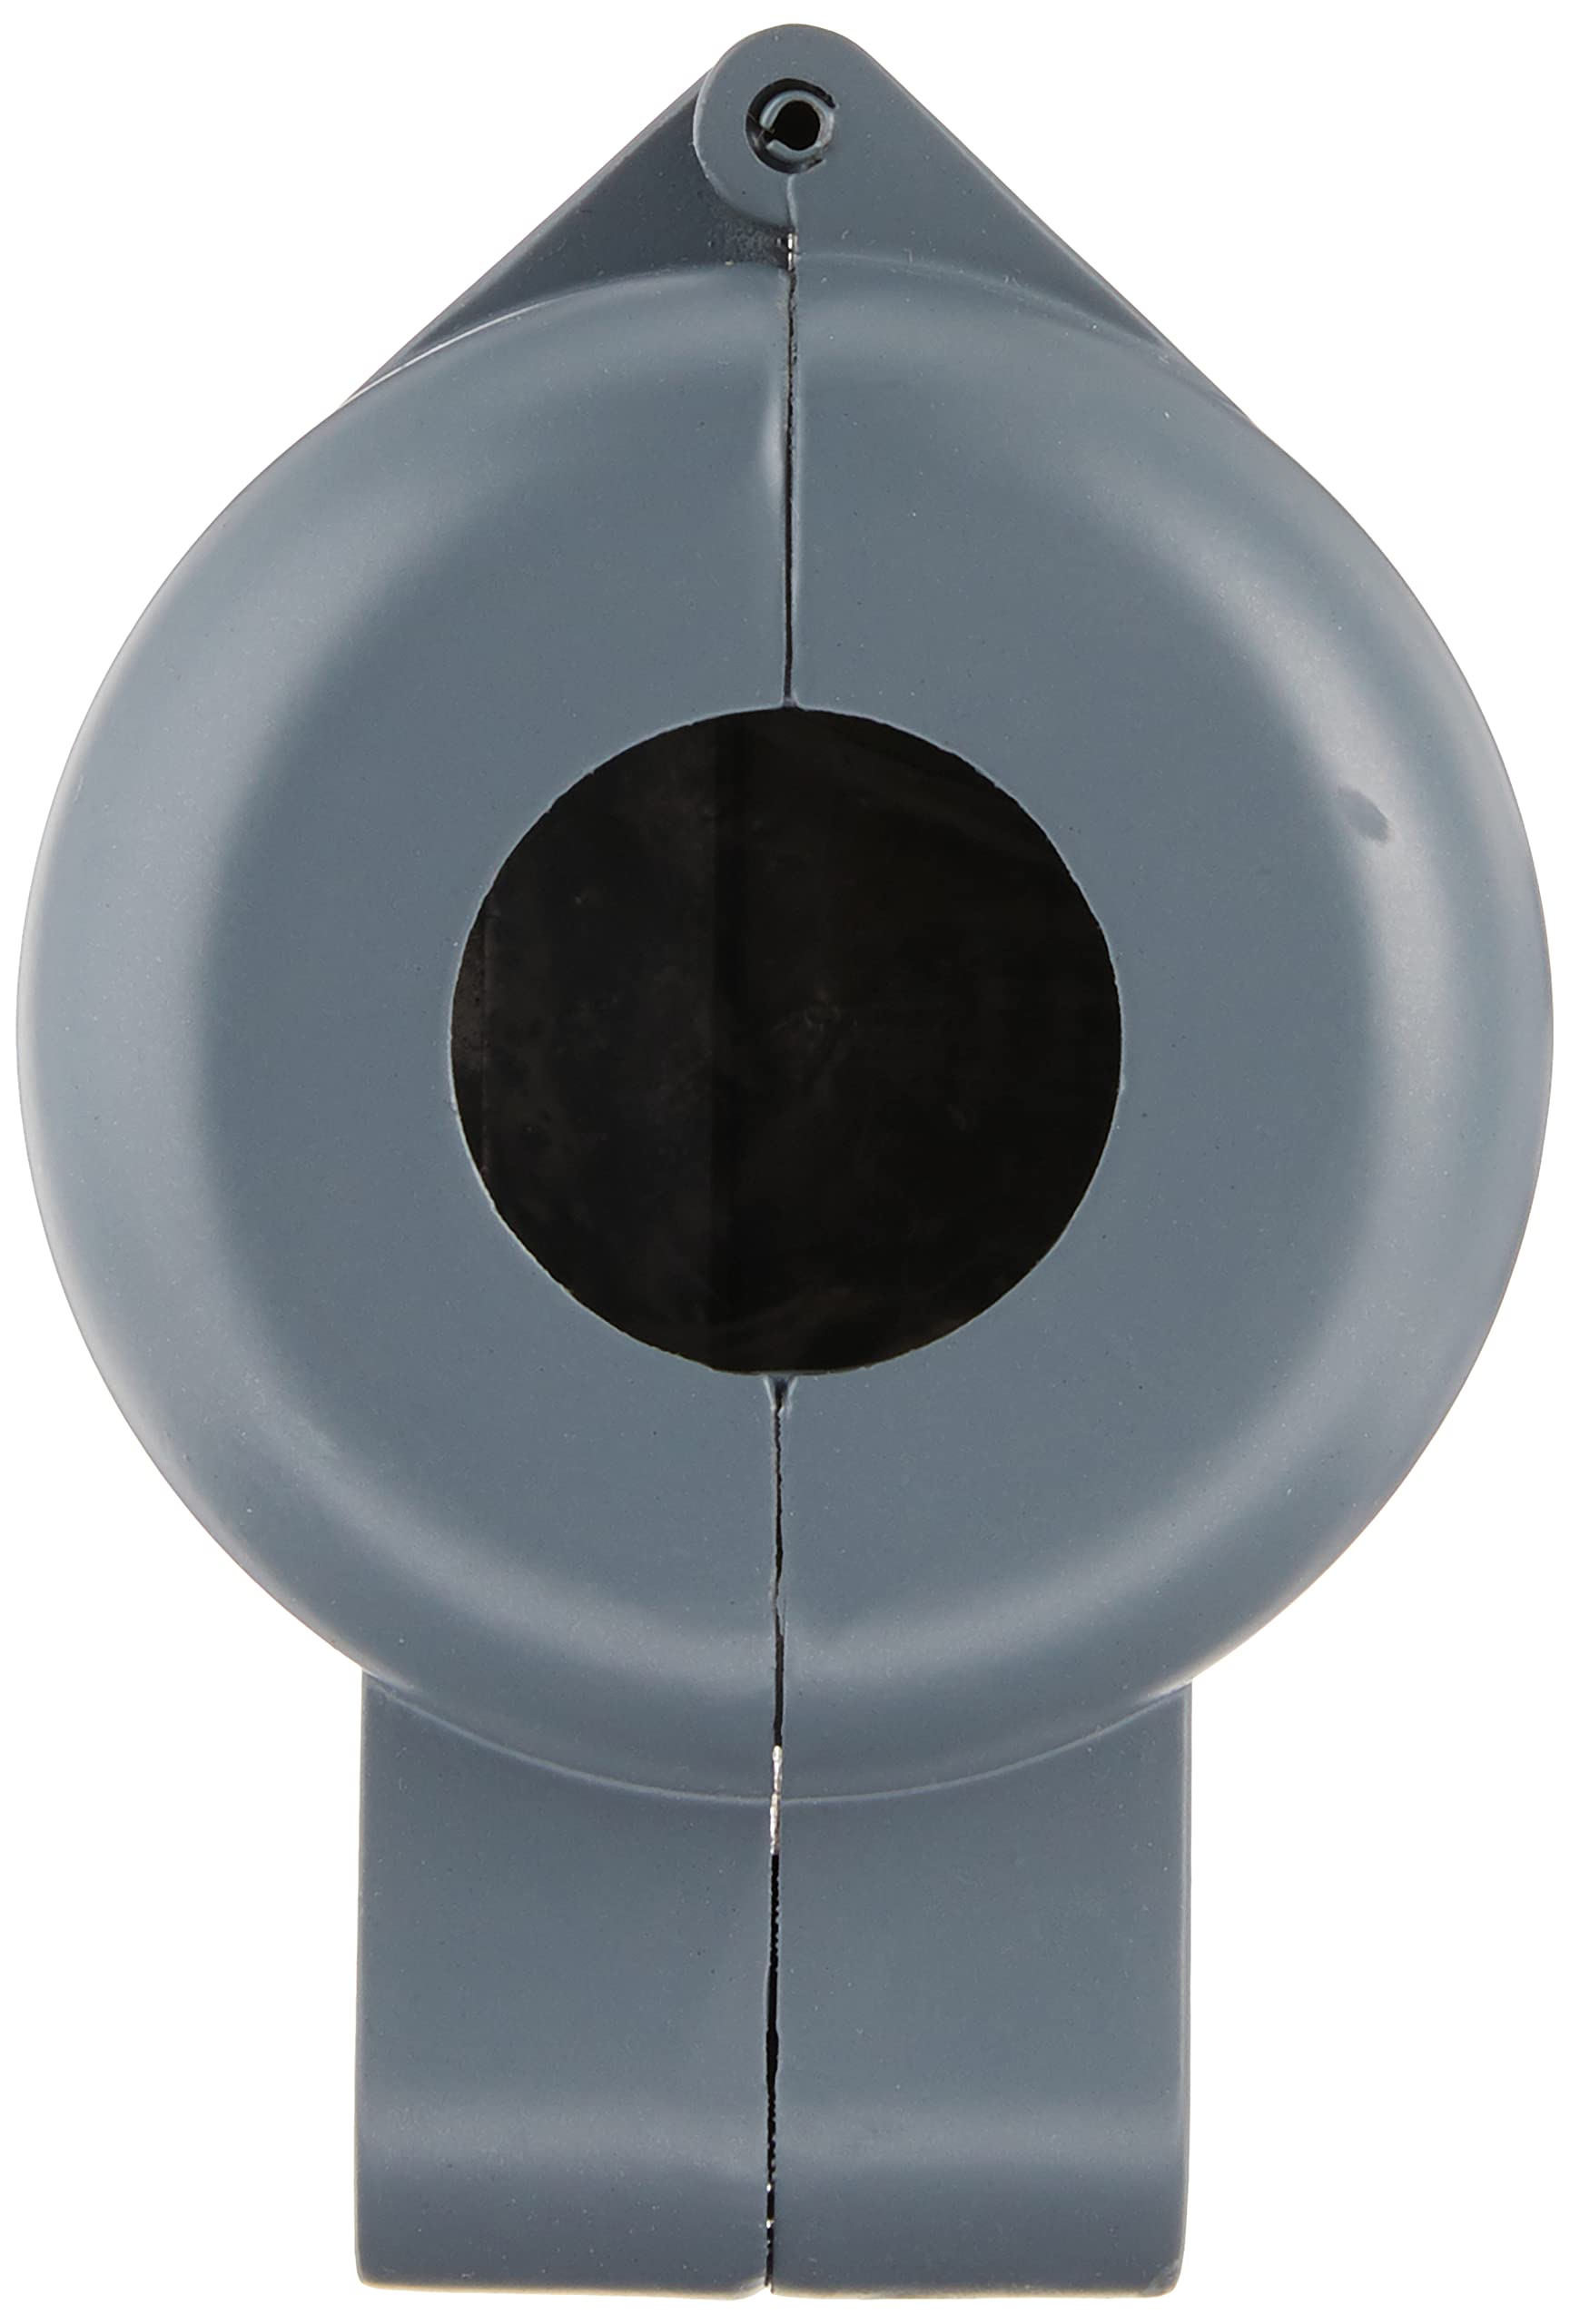 Defender Security EP 4180 Doorknob Lock-Out Device – Doorknob Lock w/ Key to Block Access to Keyhole, Removeable & Easy to Use, Fits Round Doorknobs with Max Diameter of 2-7/8”, Gray (Single Pack)